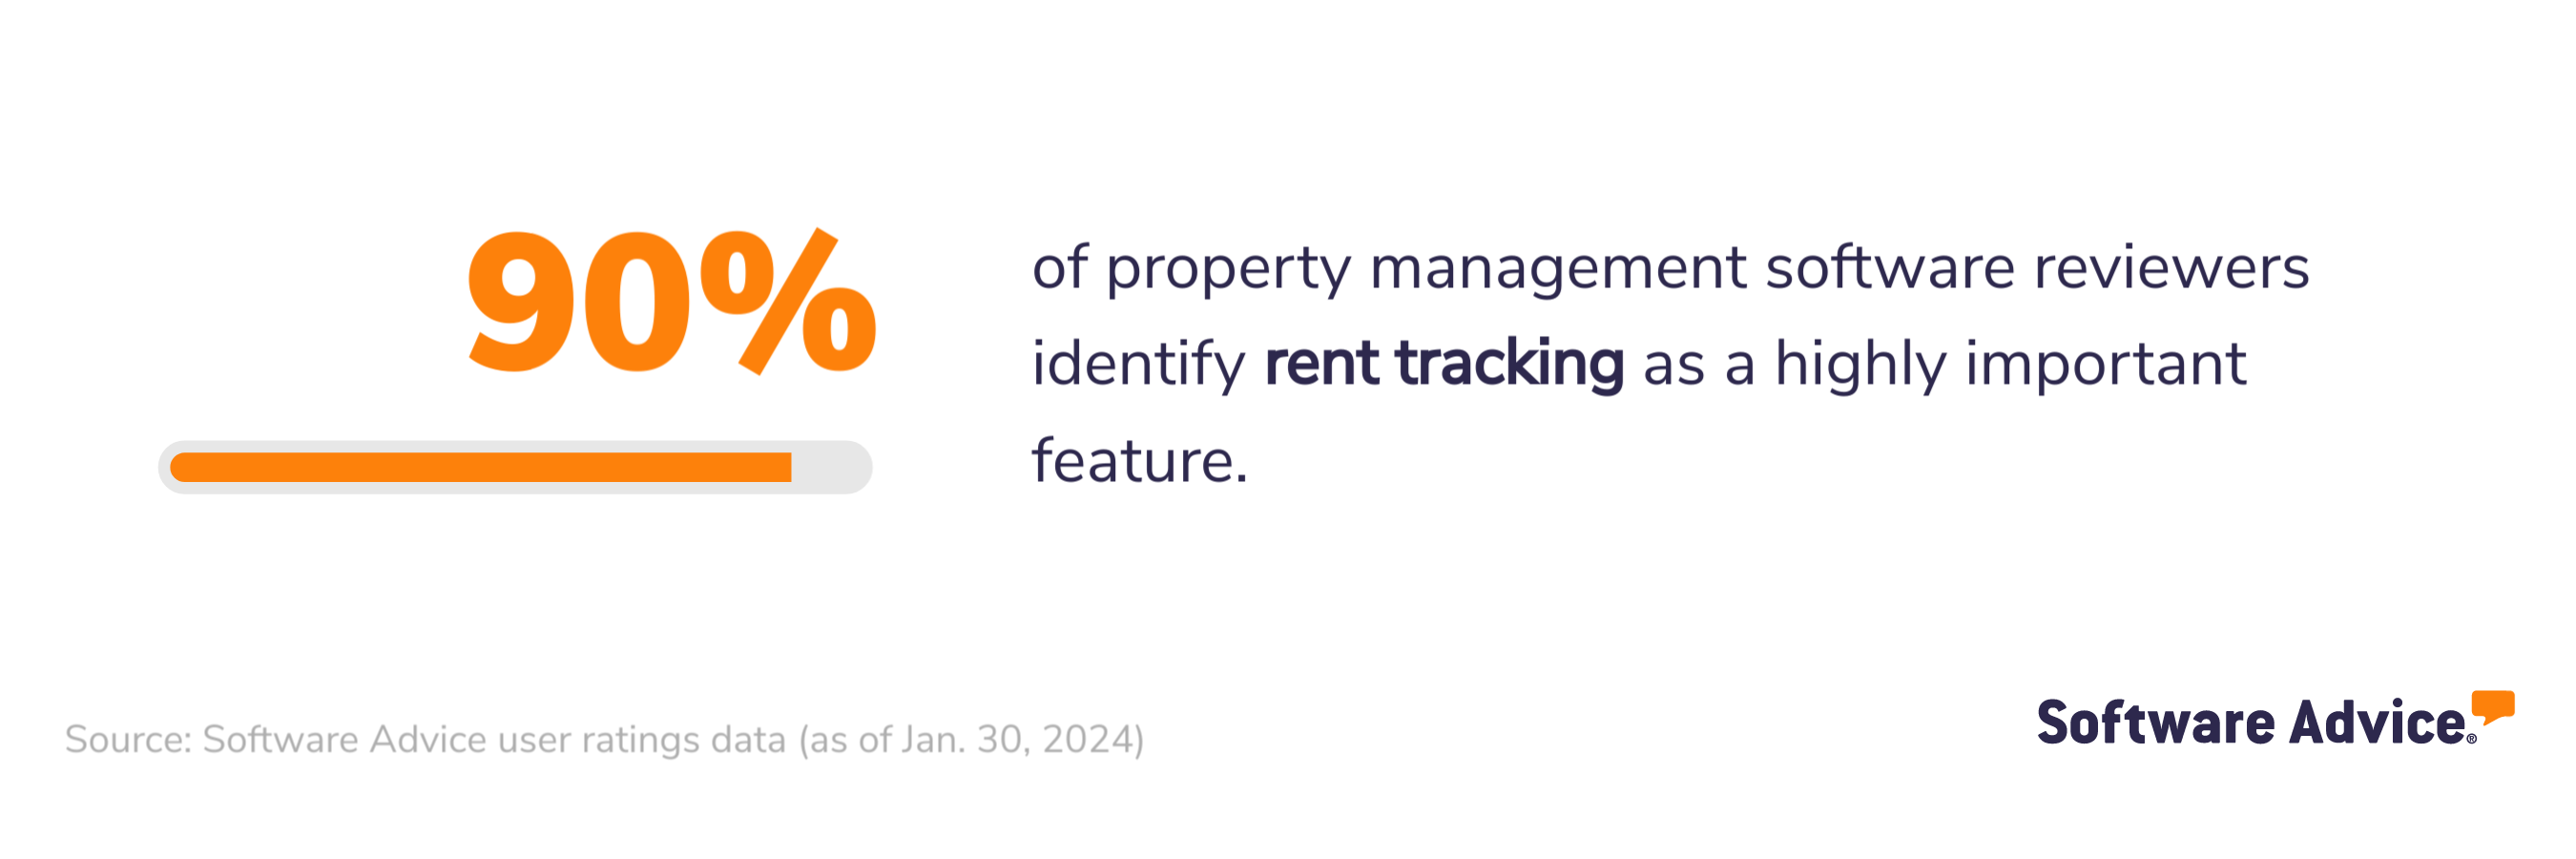 90% of property management software reviewers identify rent tracking as a highly important feature.